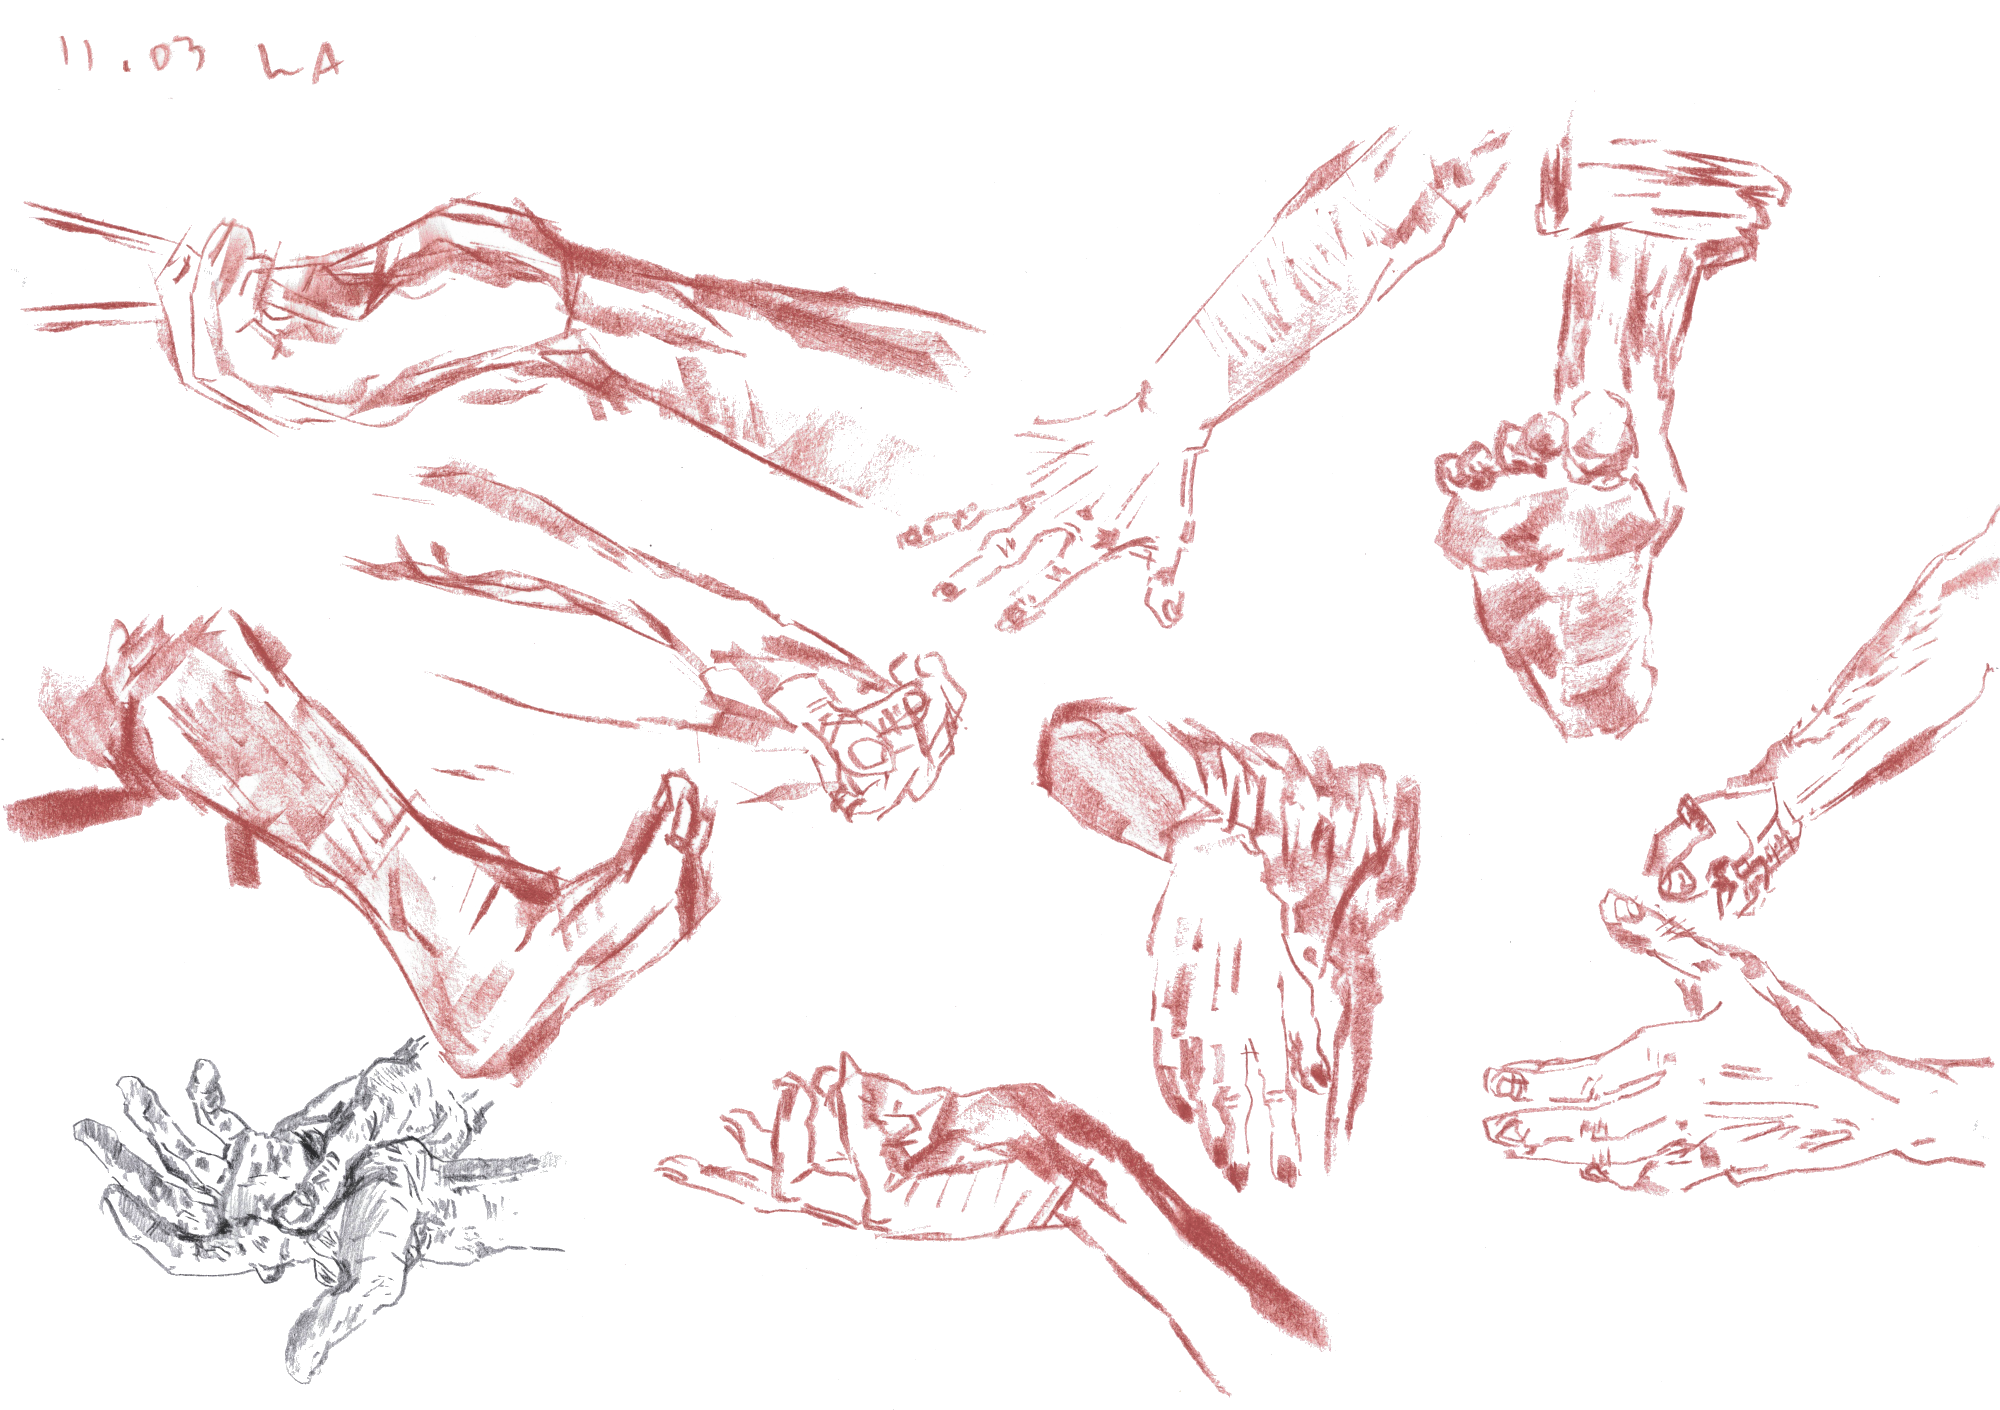 Sketches of hands and feed